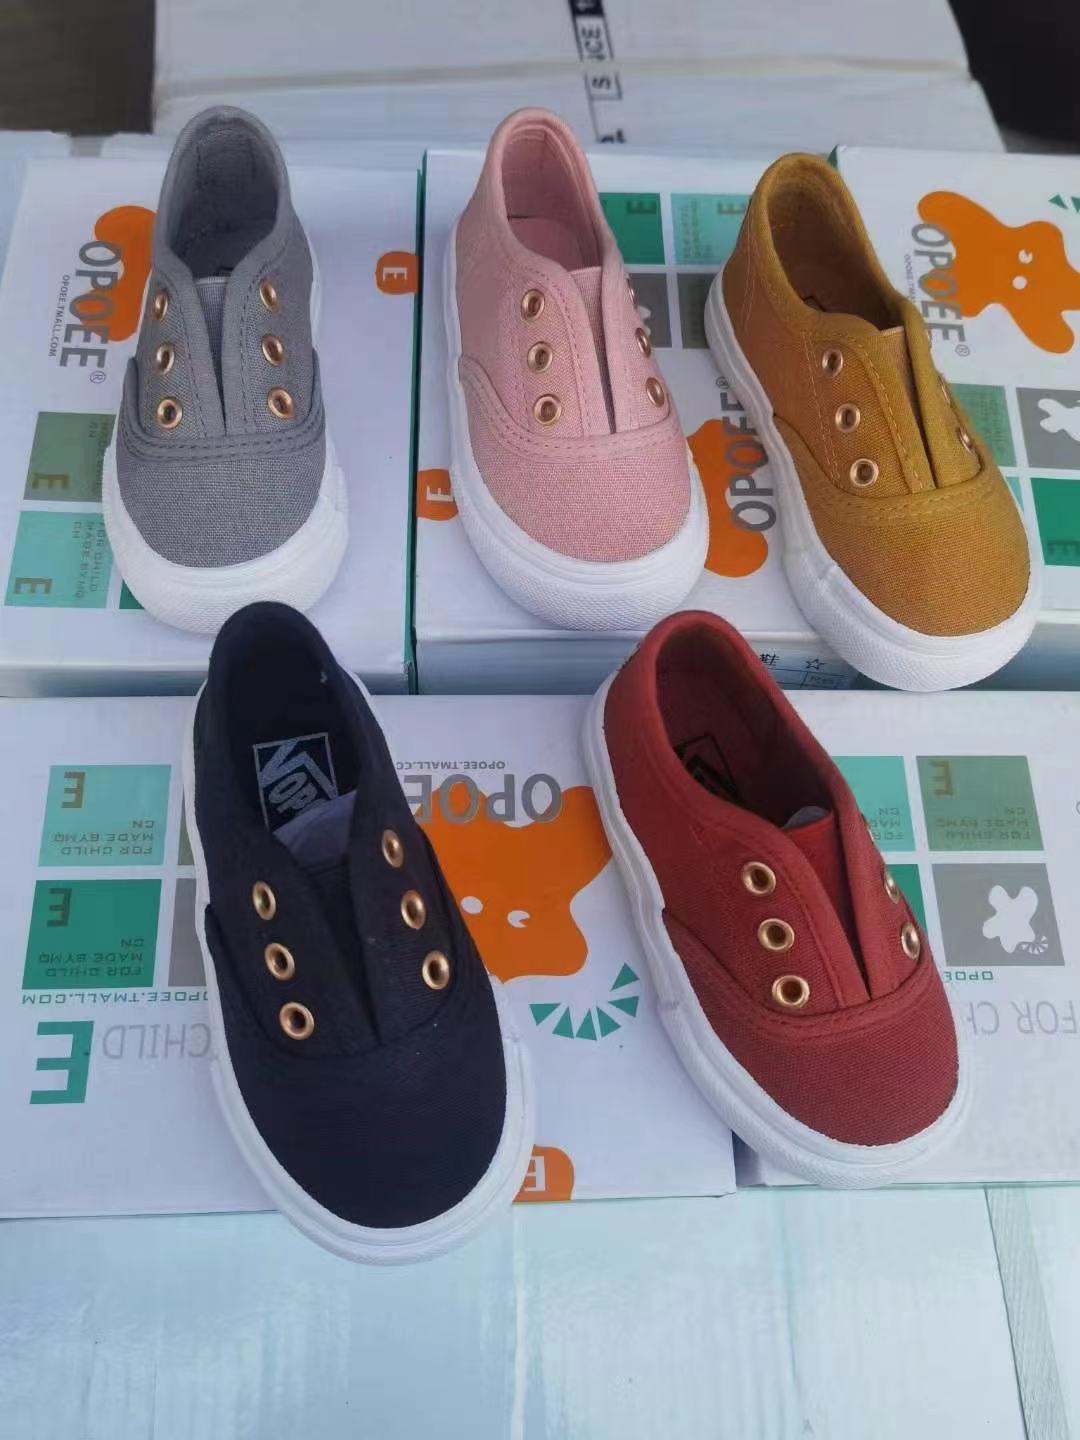 Girls Boys Sneakers Toddler Canvas Shoes...